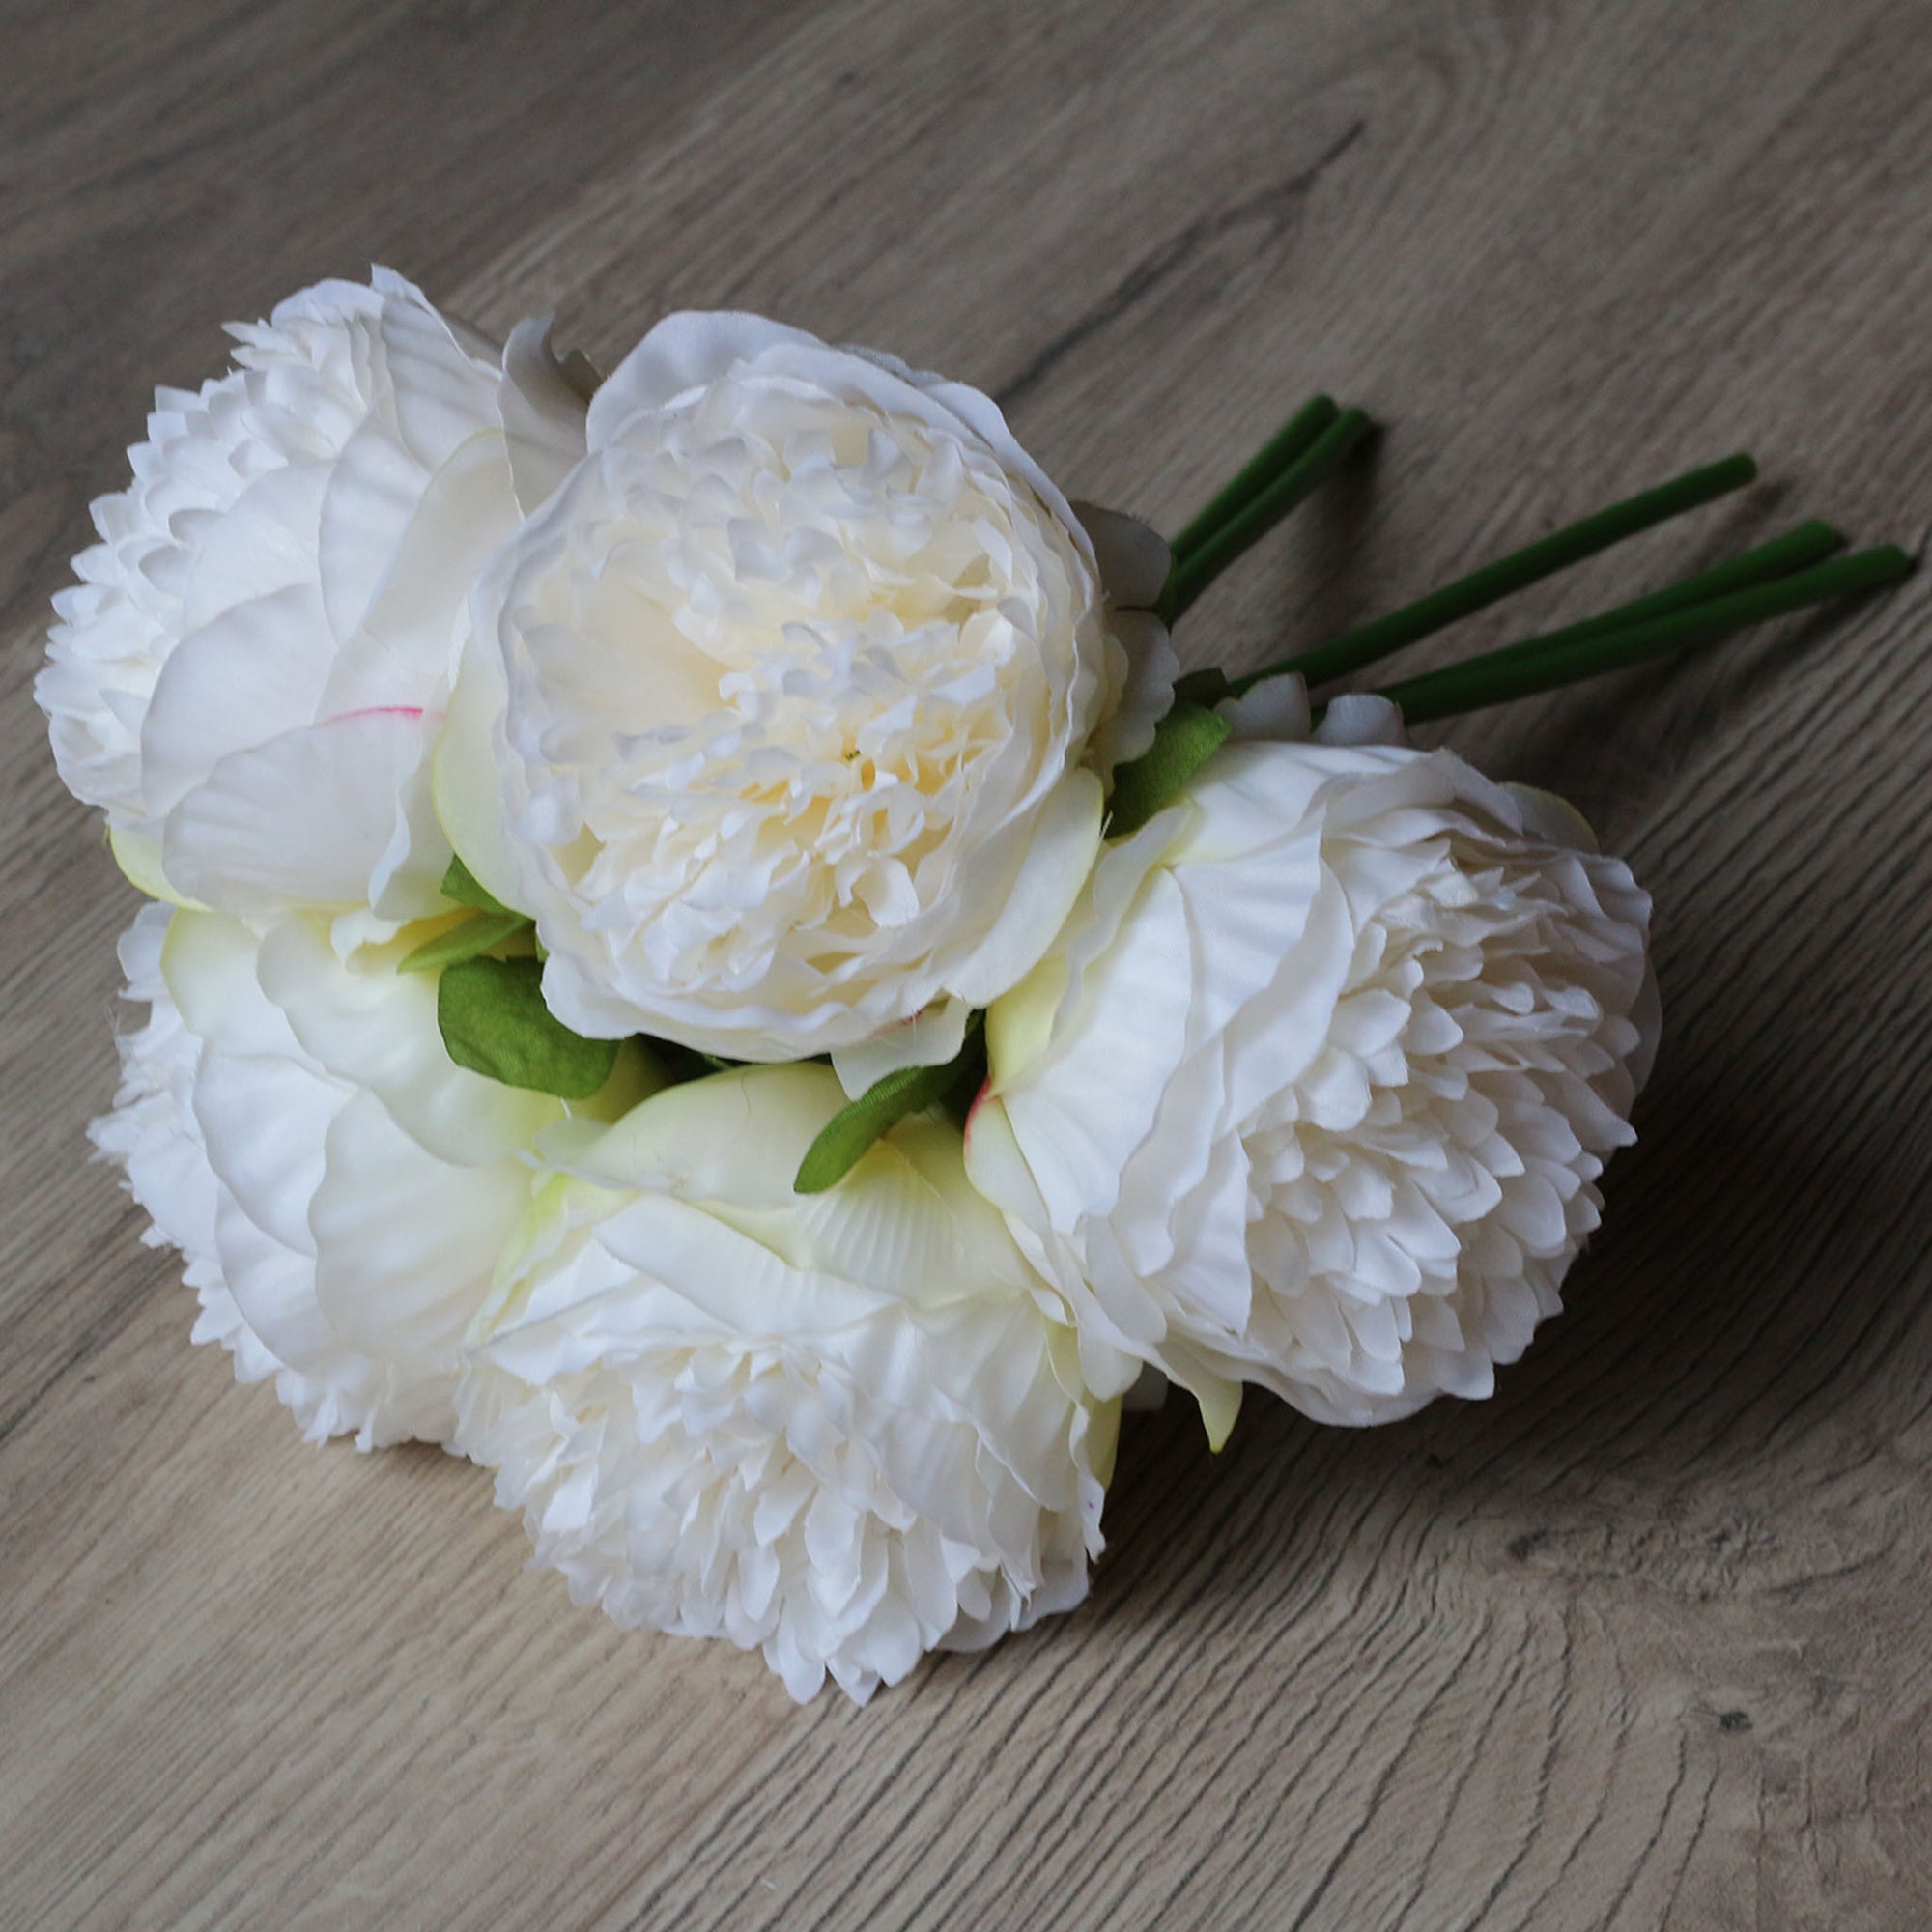 White Flowers Silk Peony Bouquet 5 Heads Artificial Peonies Wedding Decorations